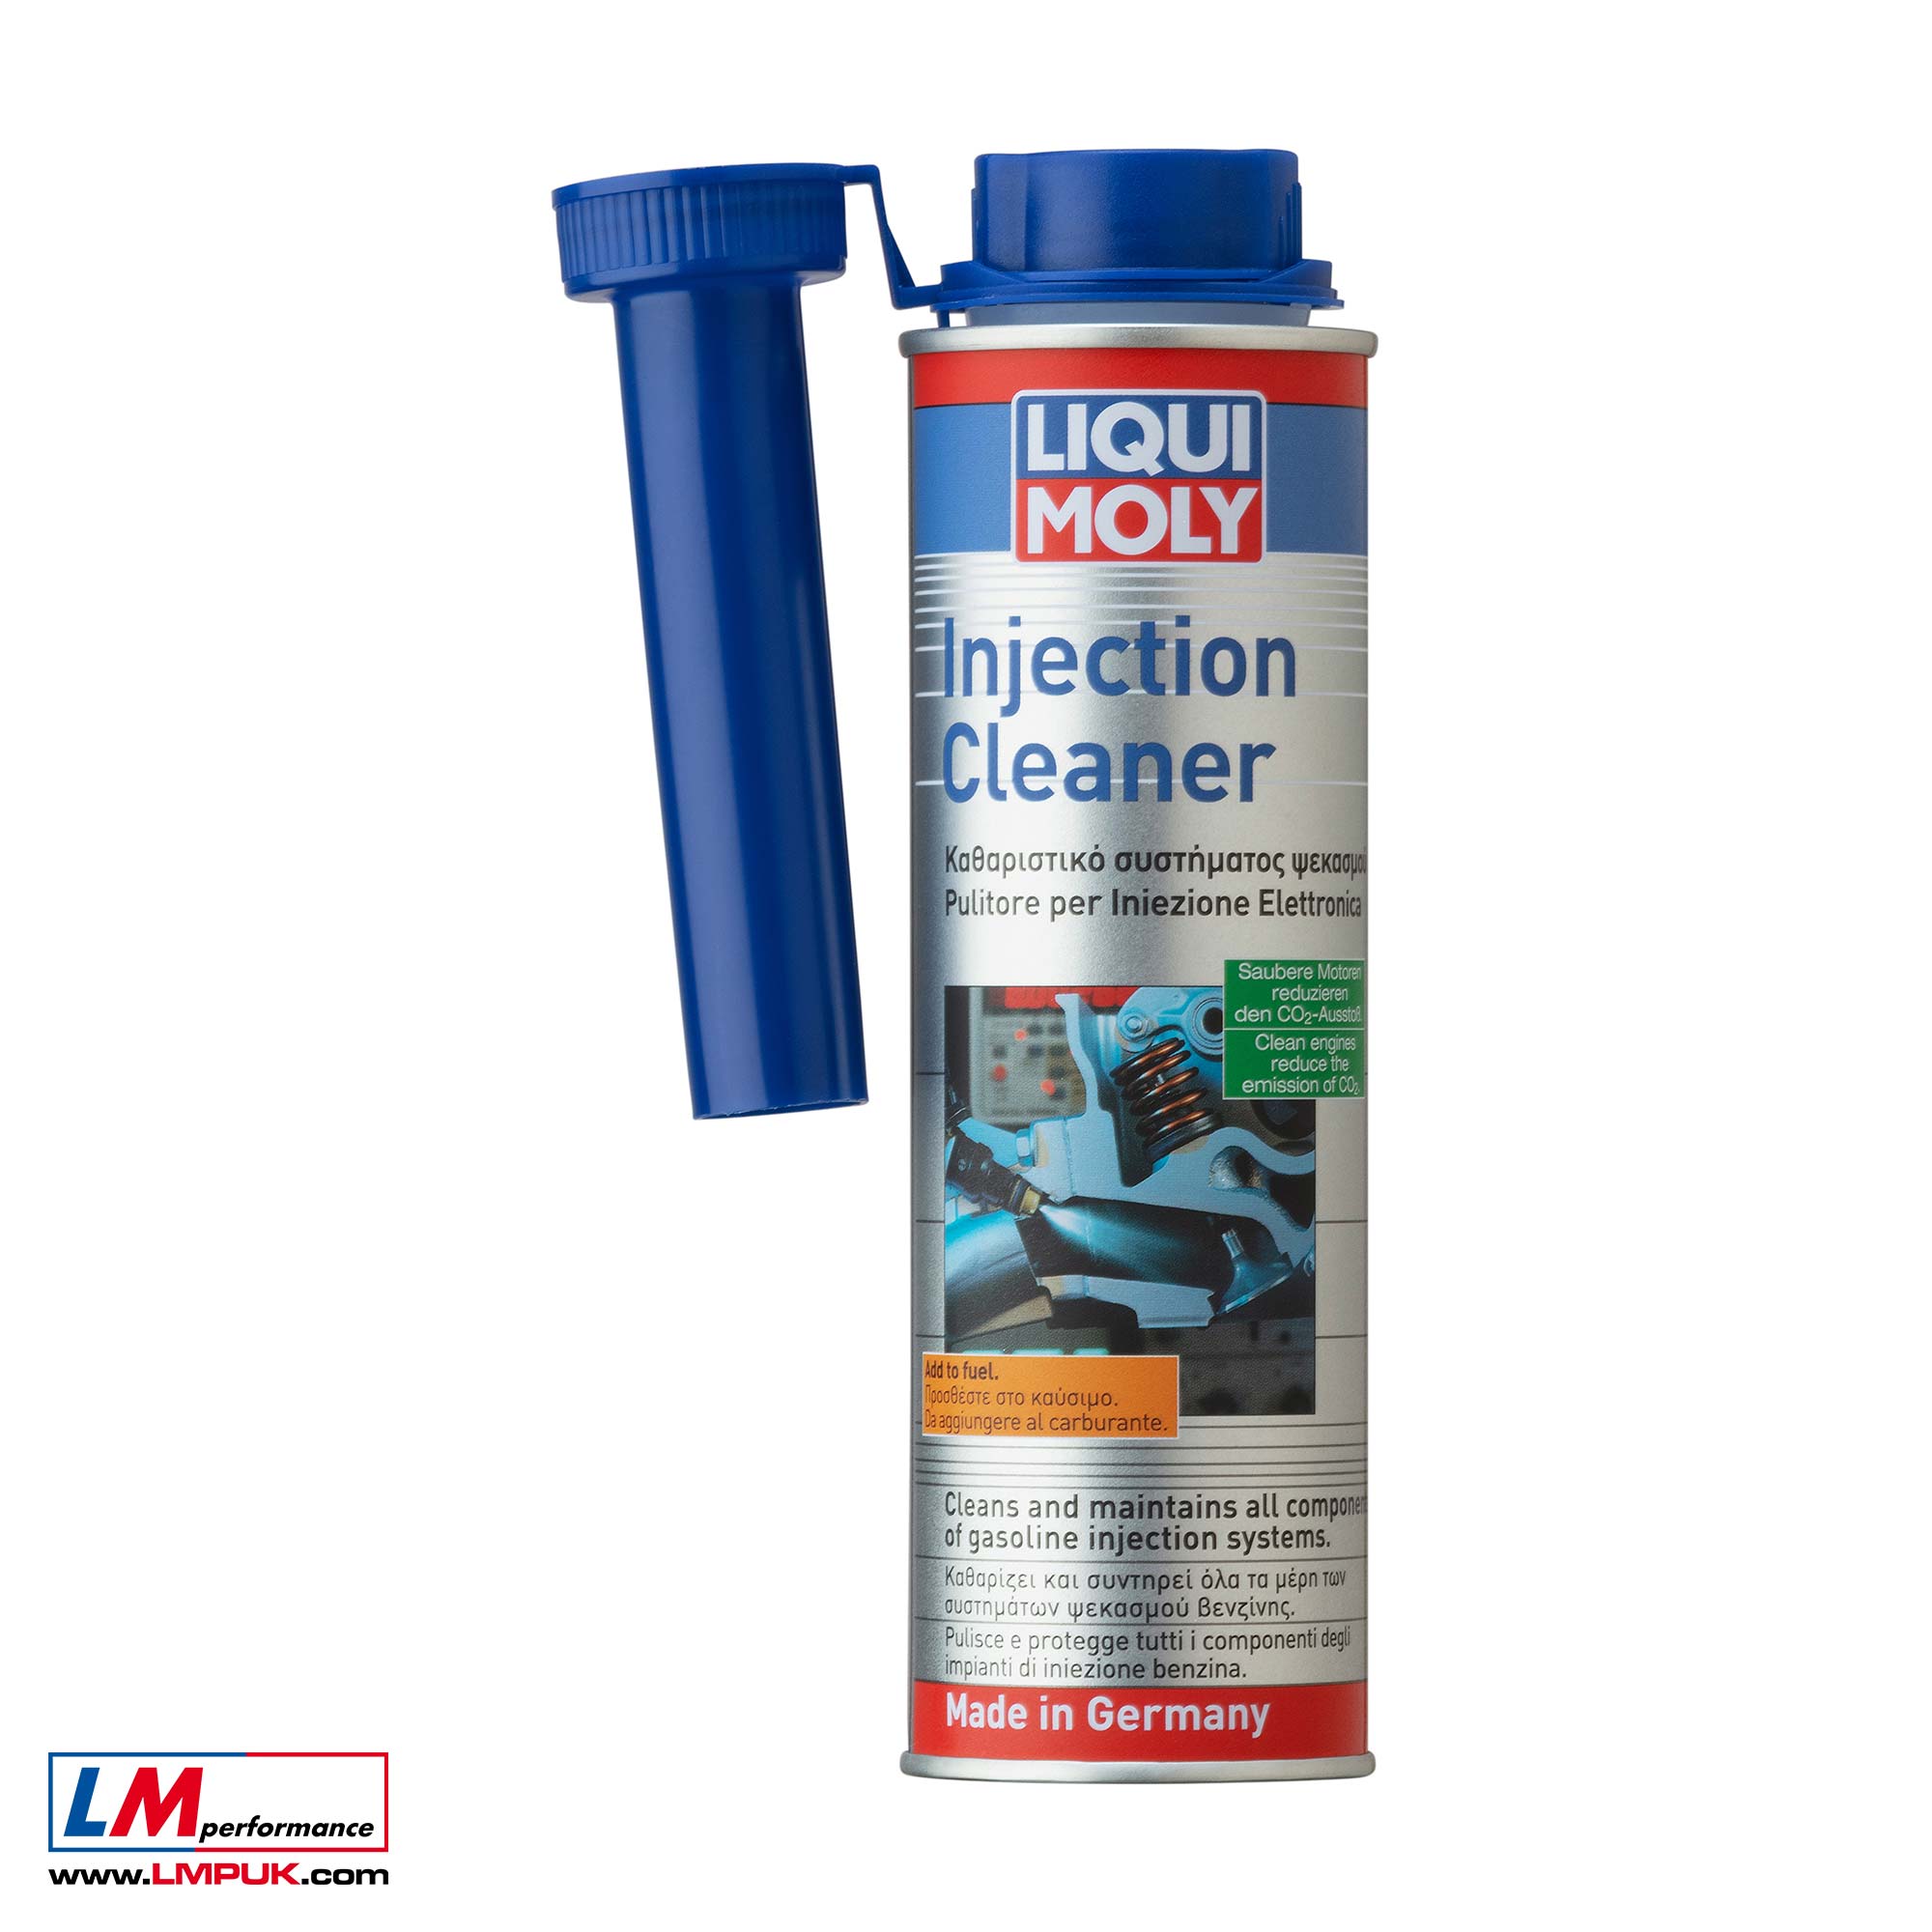 Injection Cleaner by LIQUI MOLY – LM Performance